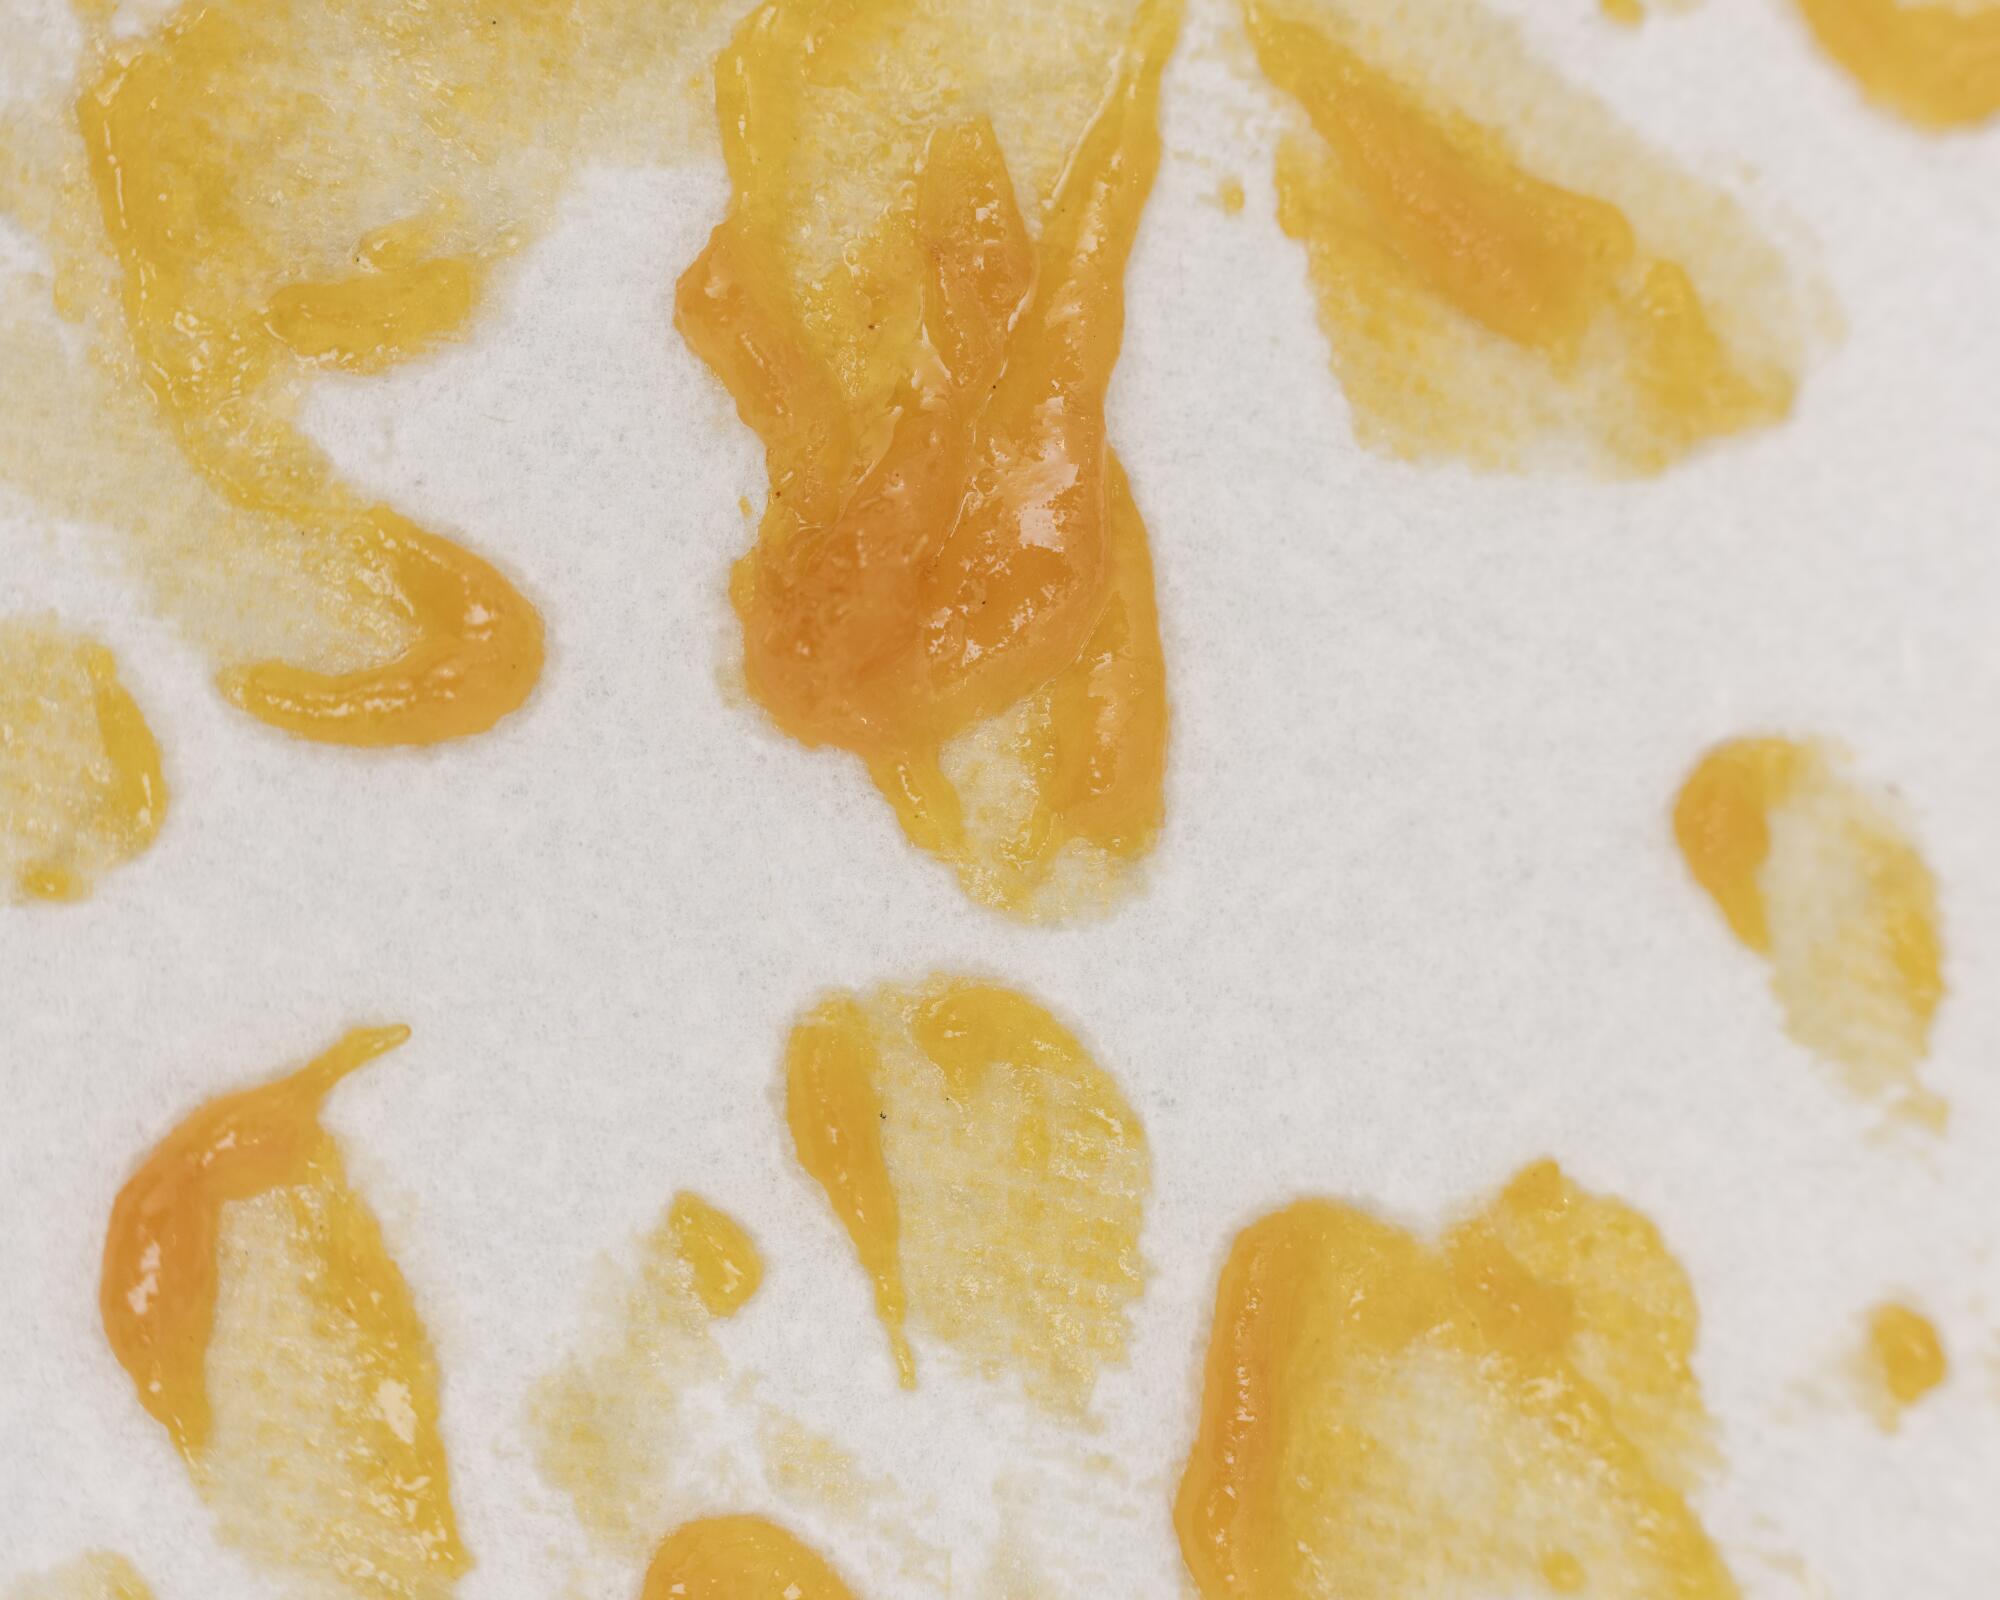 Orange smears are the residue from removing imperfections from sun-dried apricots. 